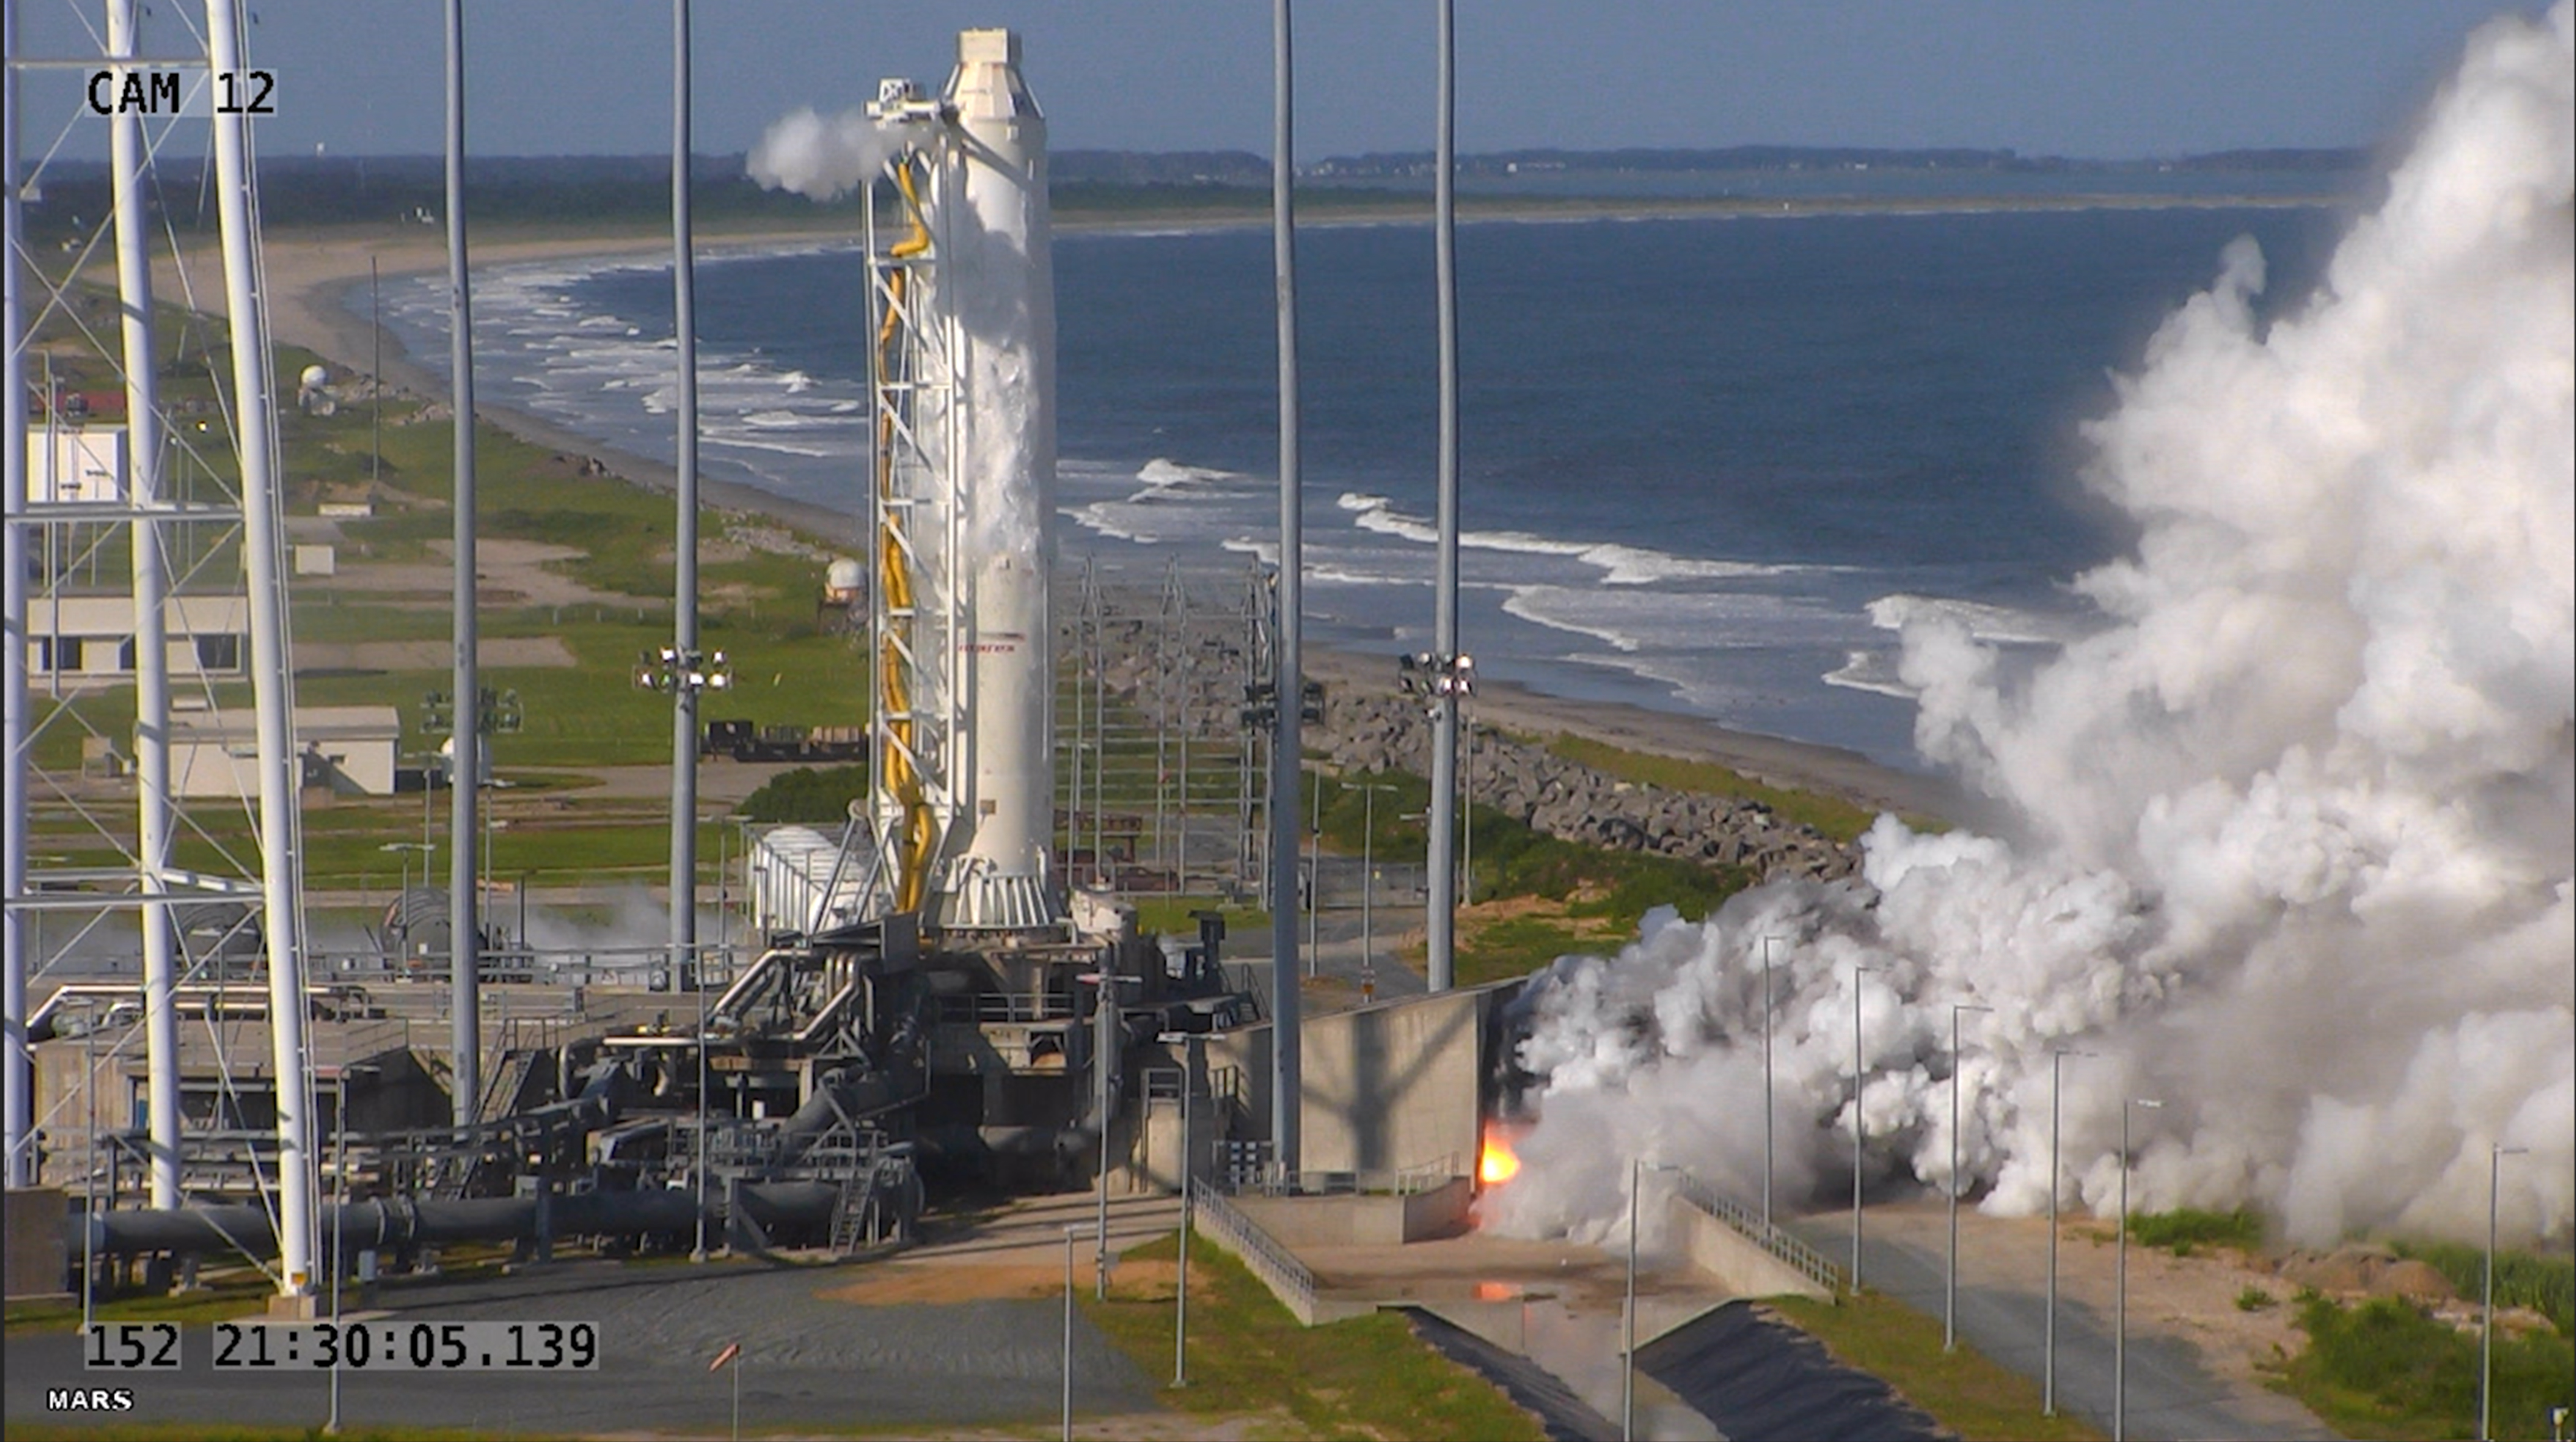 A screenshot of a video feed showing the first stage of a rocket attached to a the pad, with a flaming shooting out of the side with a large plume of smoke.